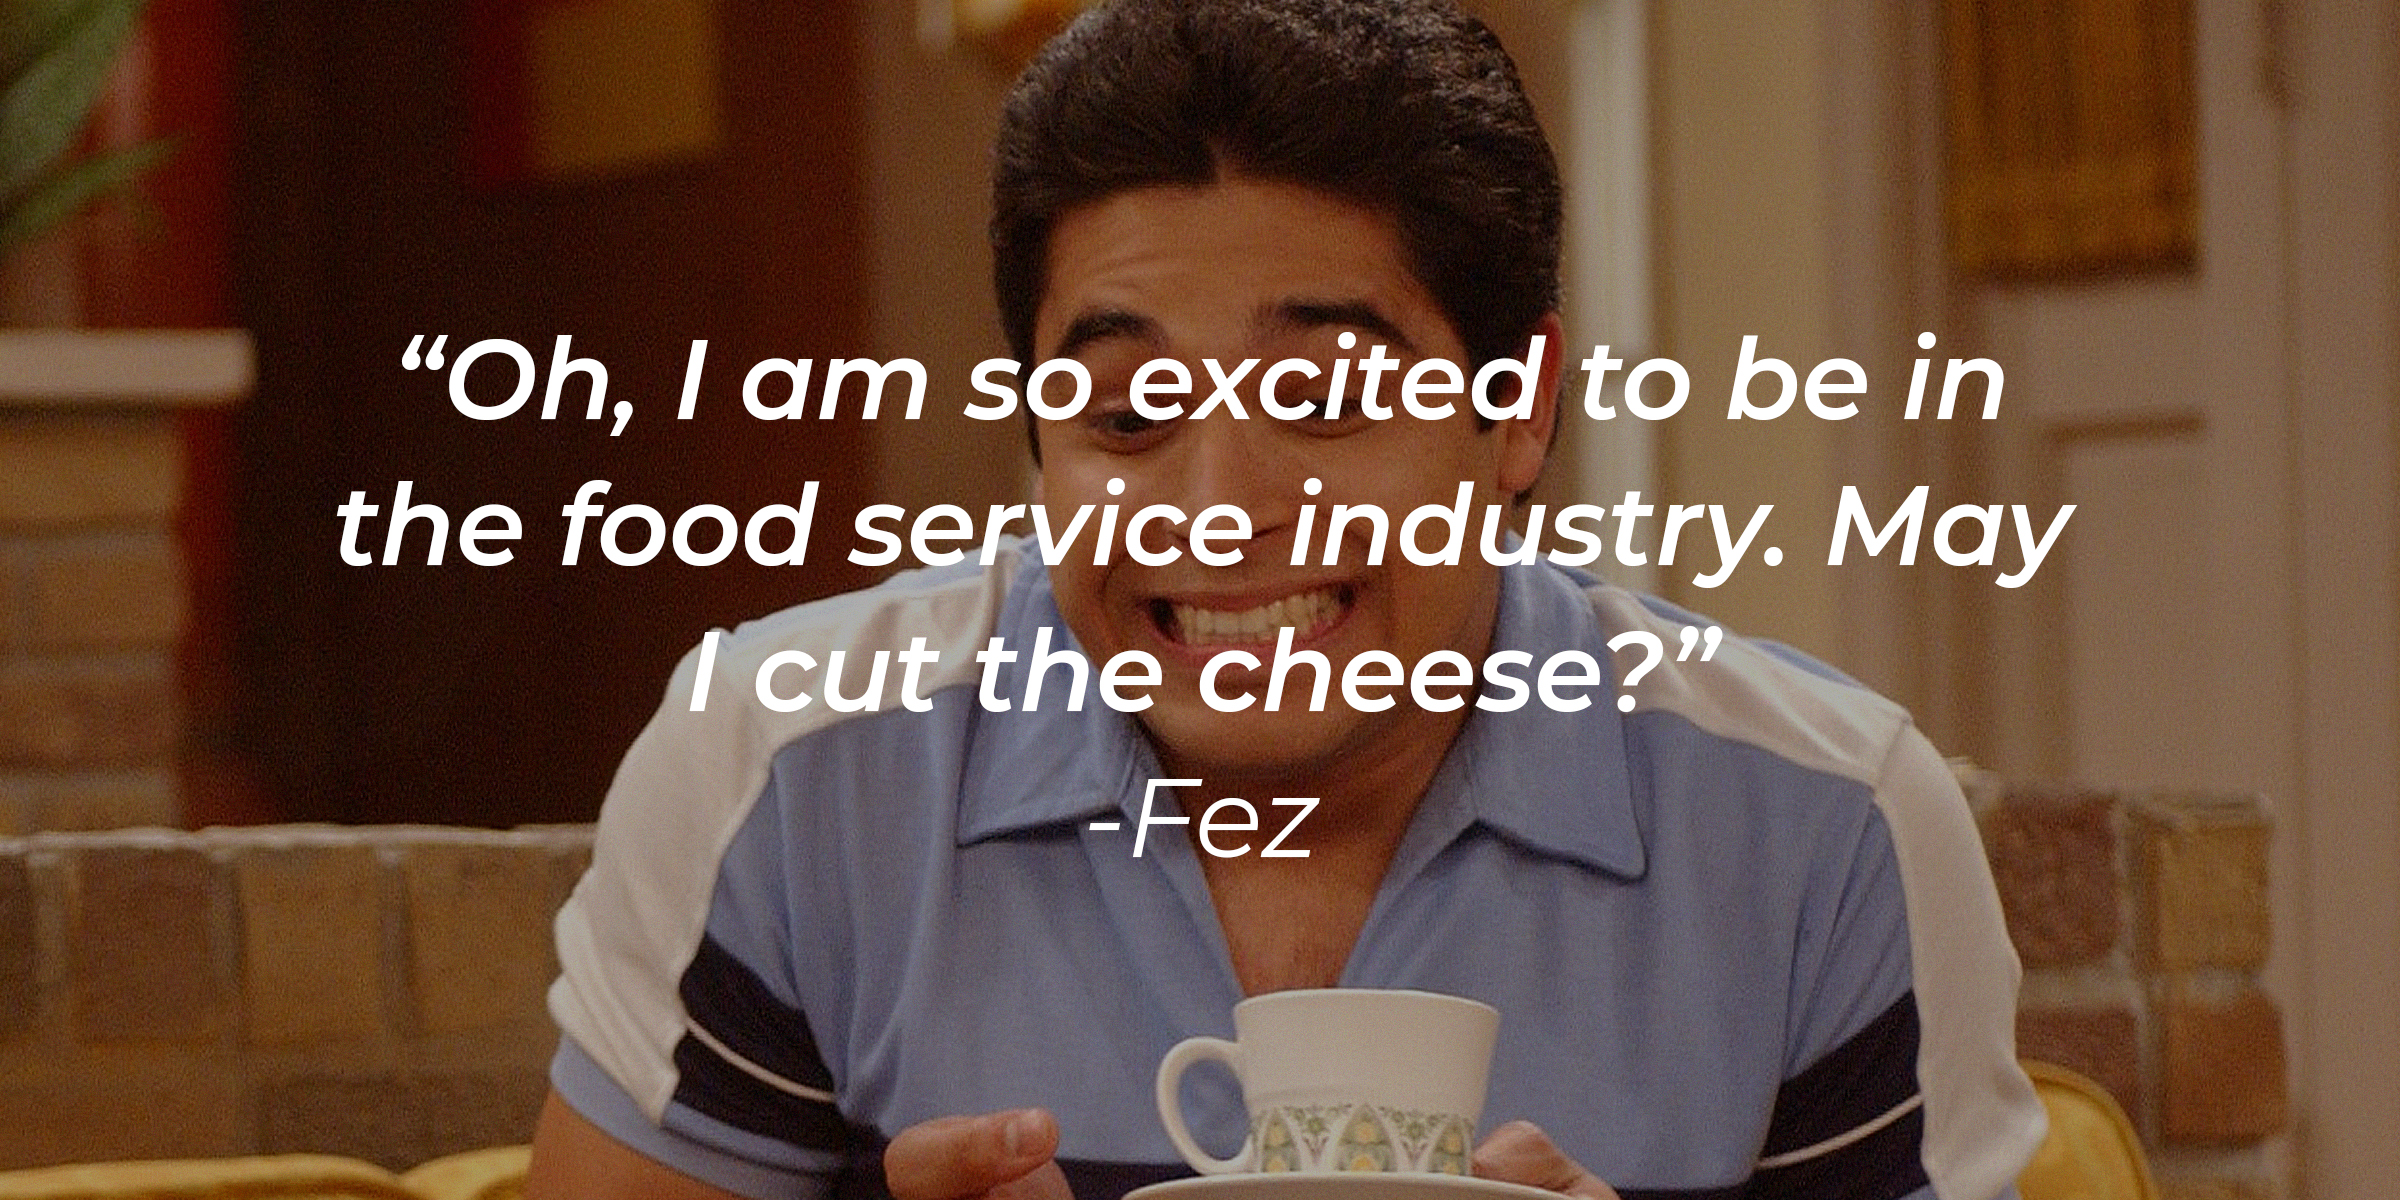 A photo of Fez with Fez's quote: “Oh, I am so excited to be in the food service industry. May I cut the cheese?” | Source: facebook.com/That-70s-Show-Official